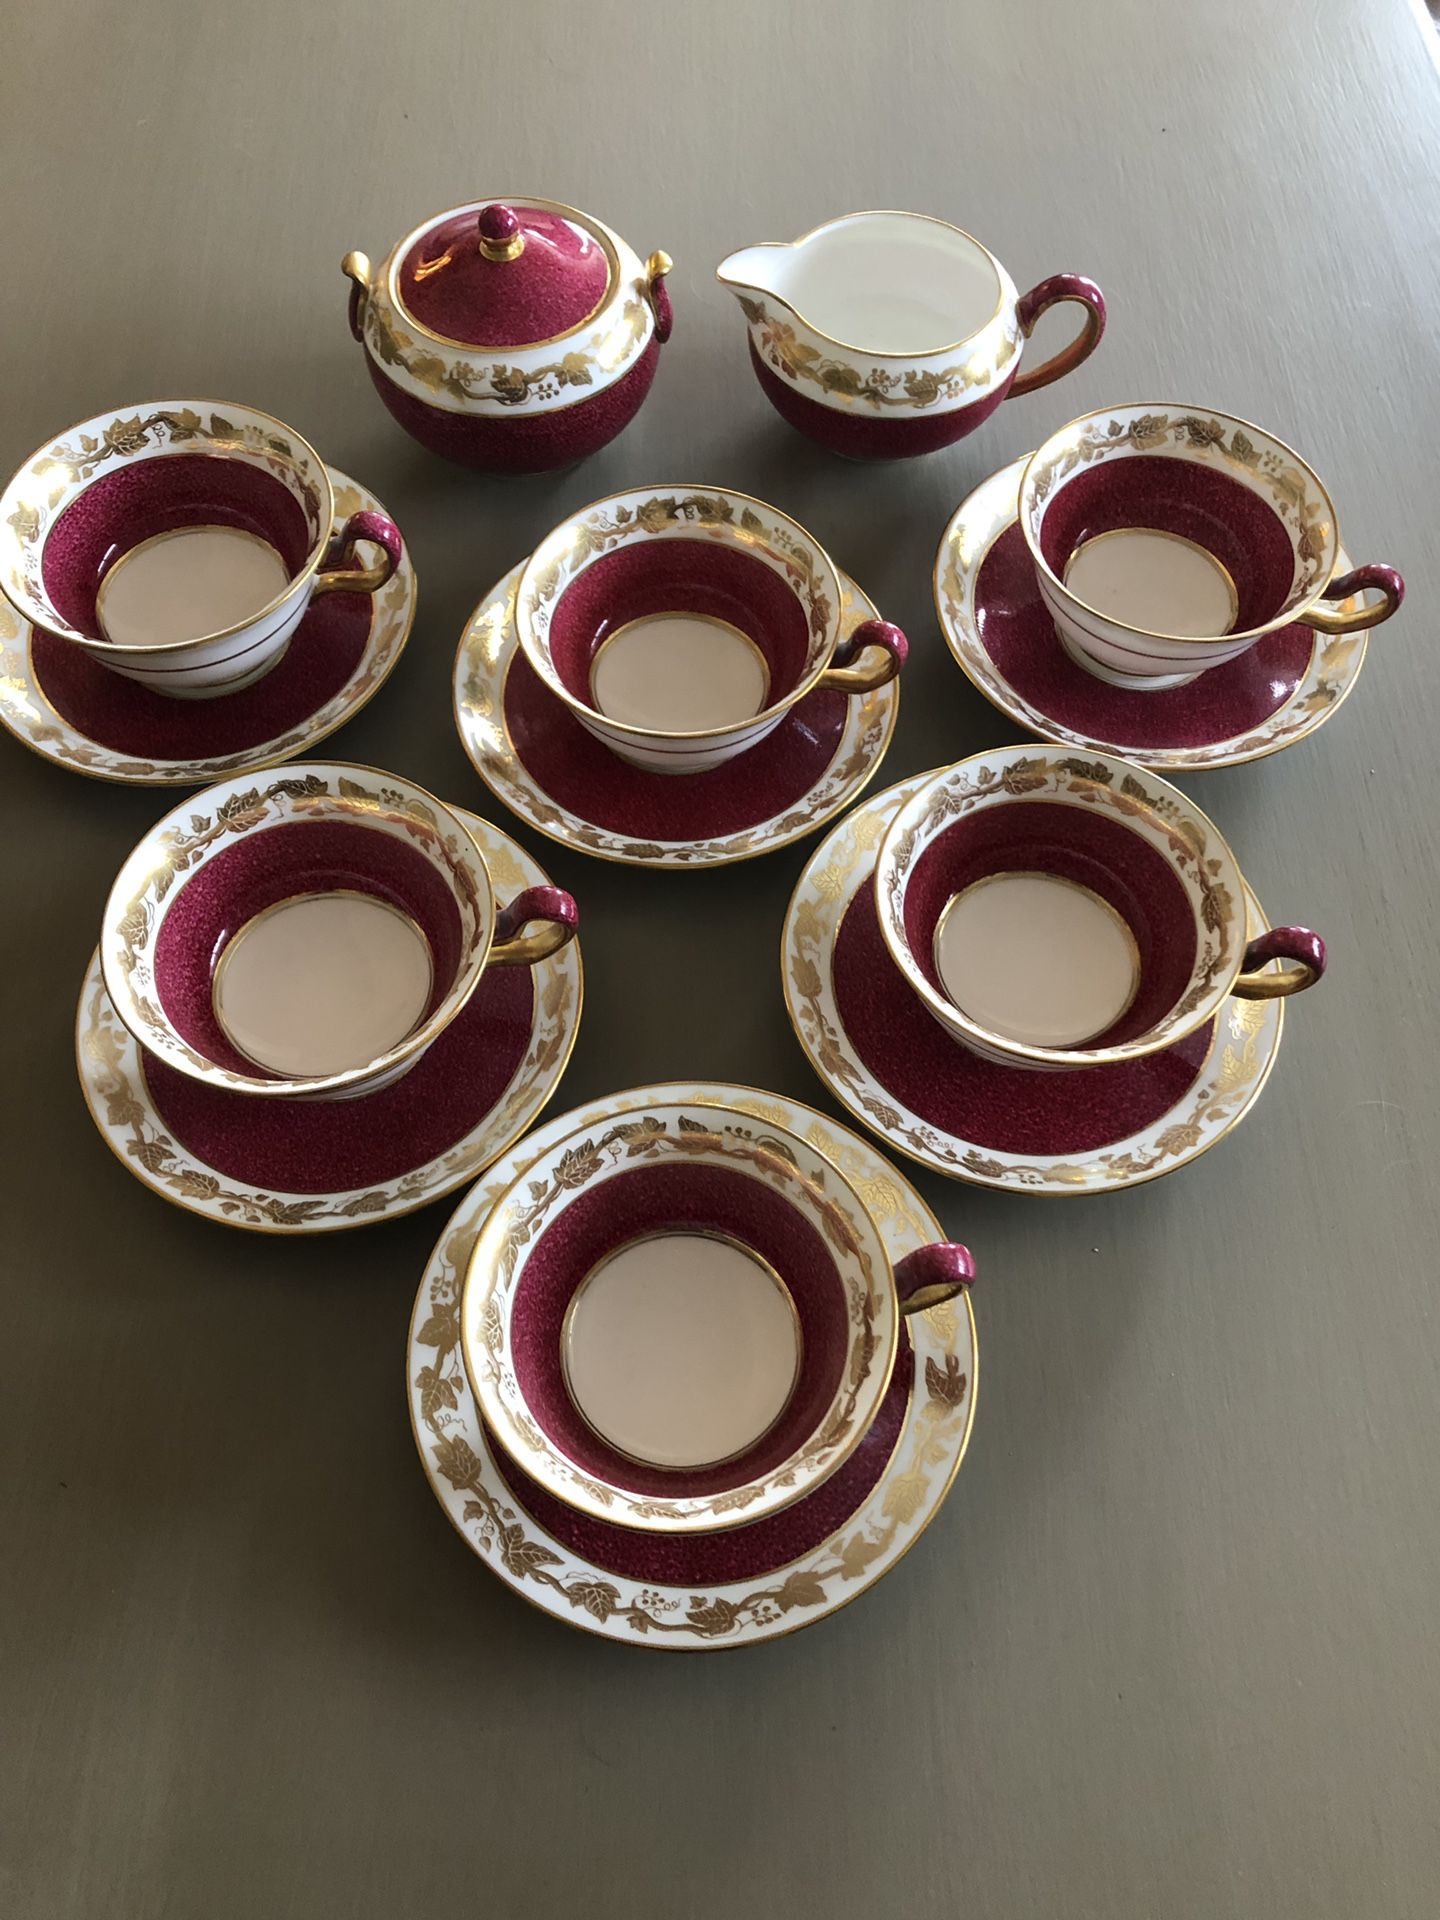 6 Antique Cup and Saucers with Creamer and Sugar Bowl